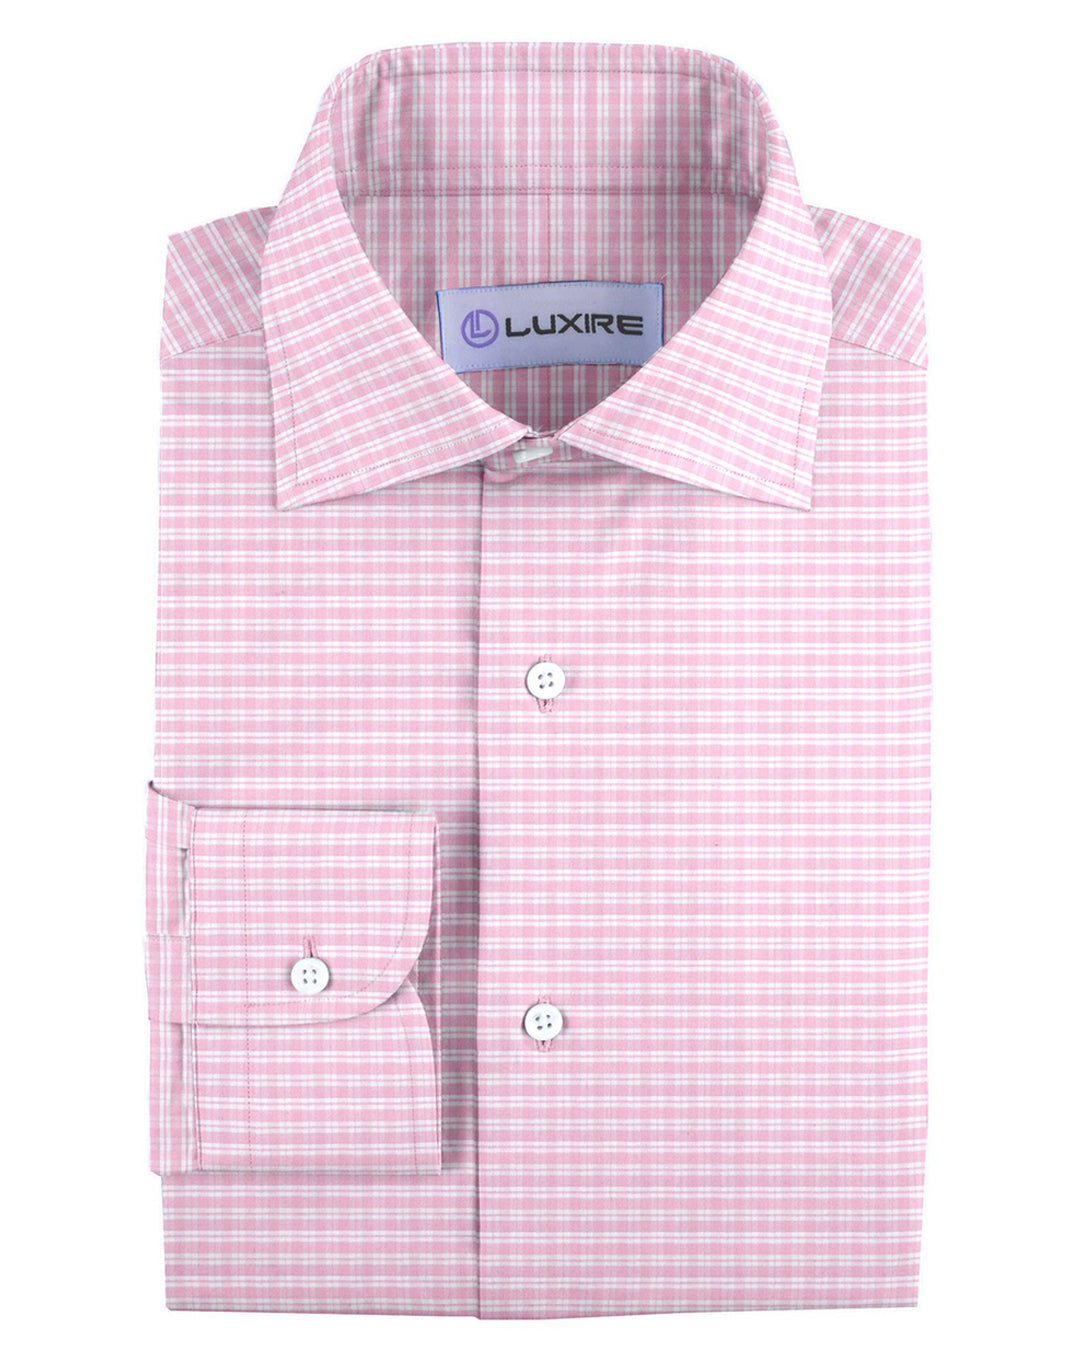 Front of the custom linen shirt for men in white with light pink checks by Luxire Clothing